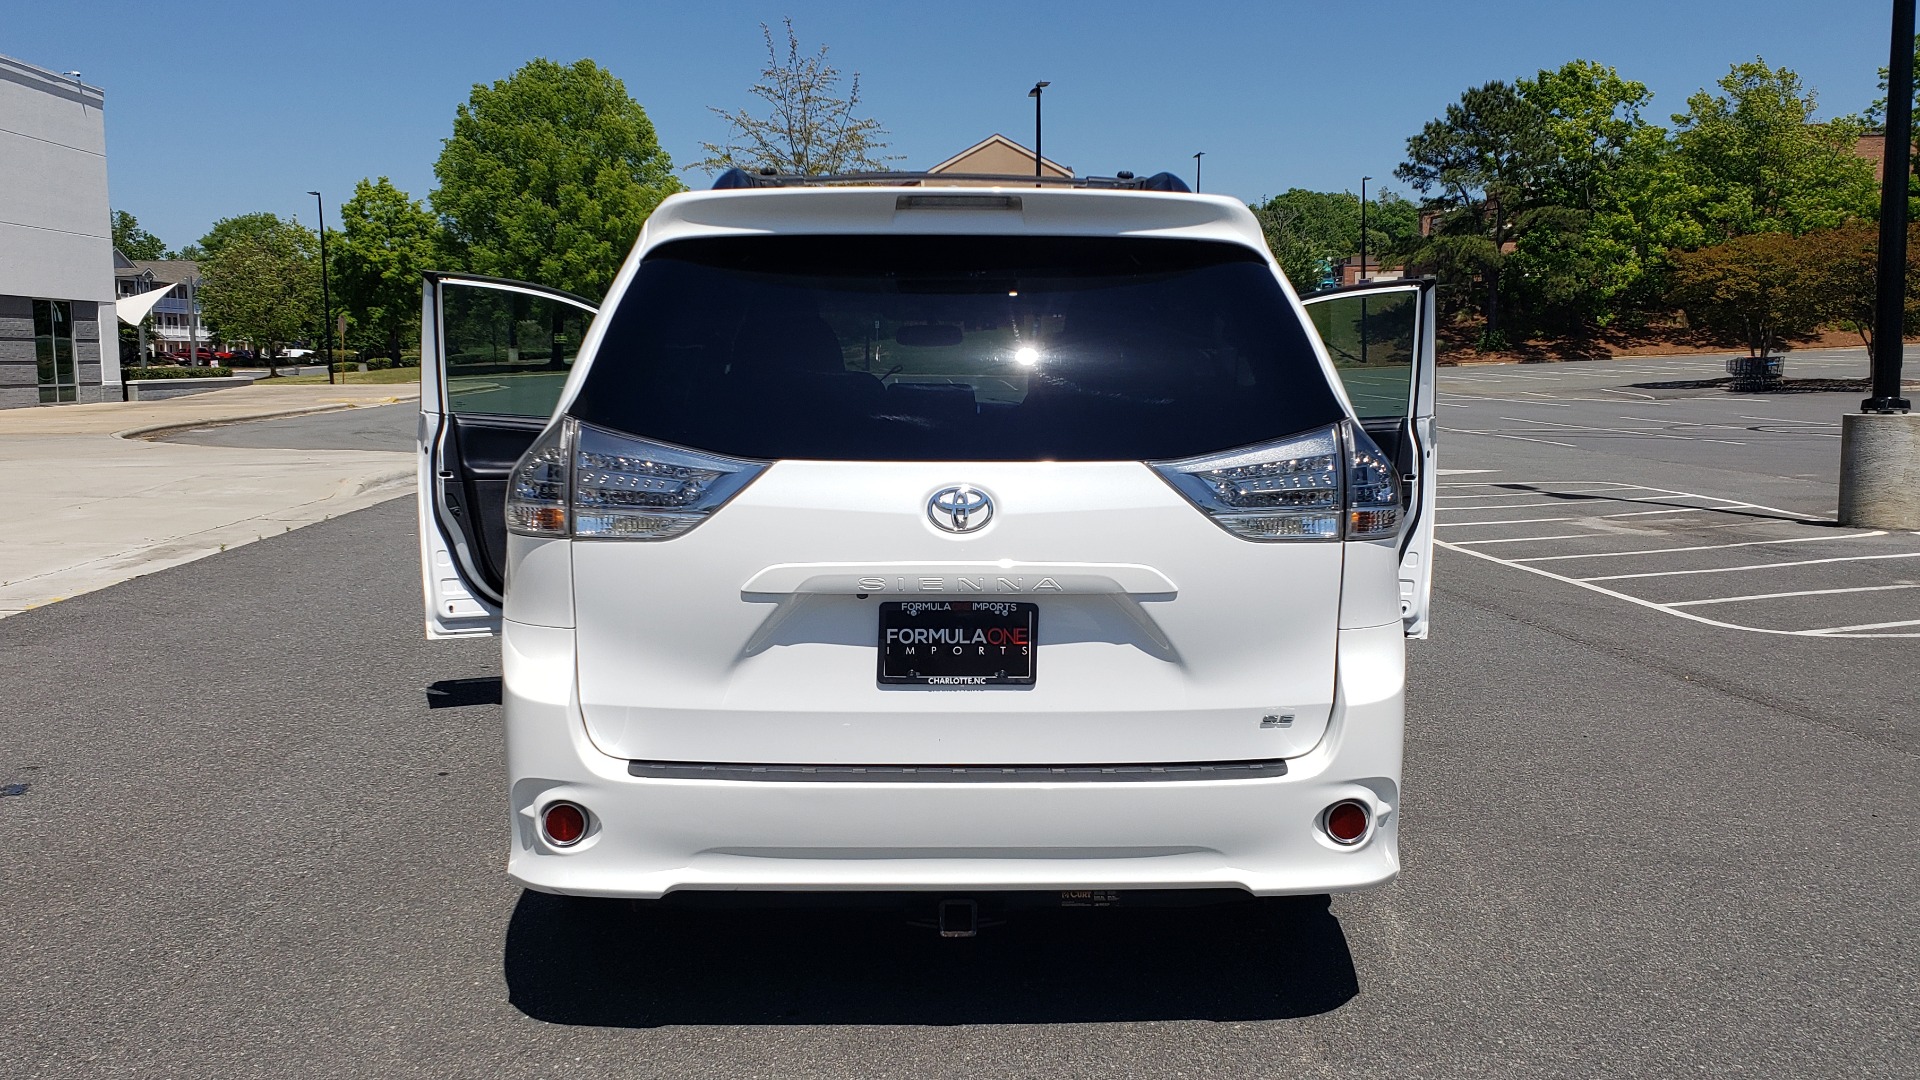 Used 2015 Toyota SIENNA SE 3.5L / FWD / 3-ROWS / 8-PASS / SUNROOF / DVD / REARVIEW for sale Sold at Formula Imports in Charlotte NC 28227 29